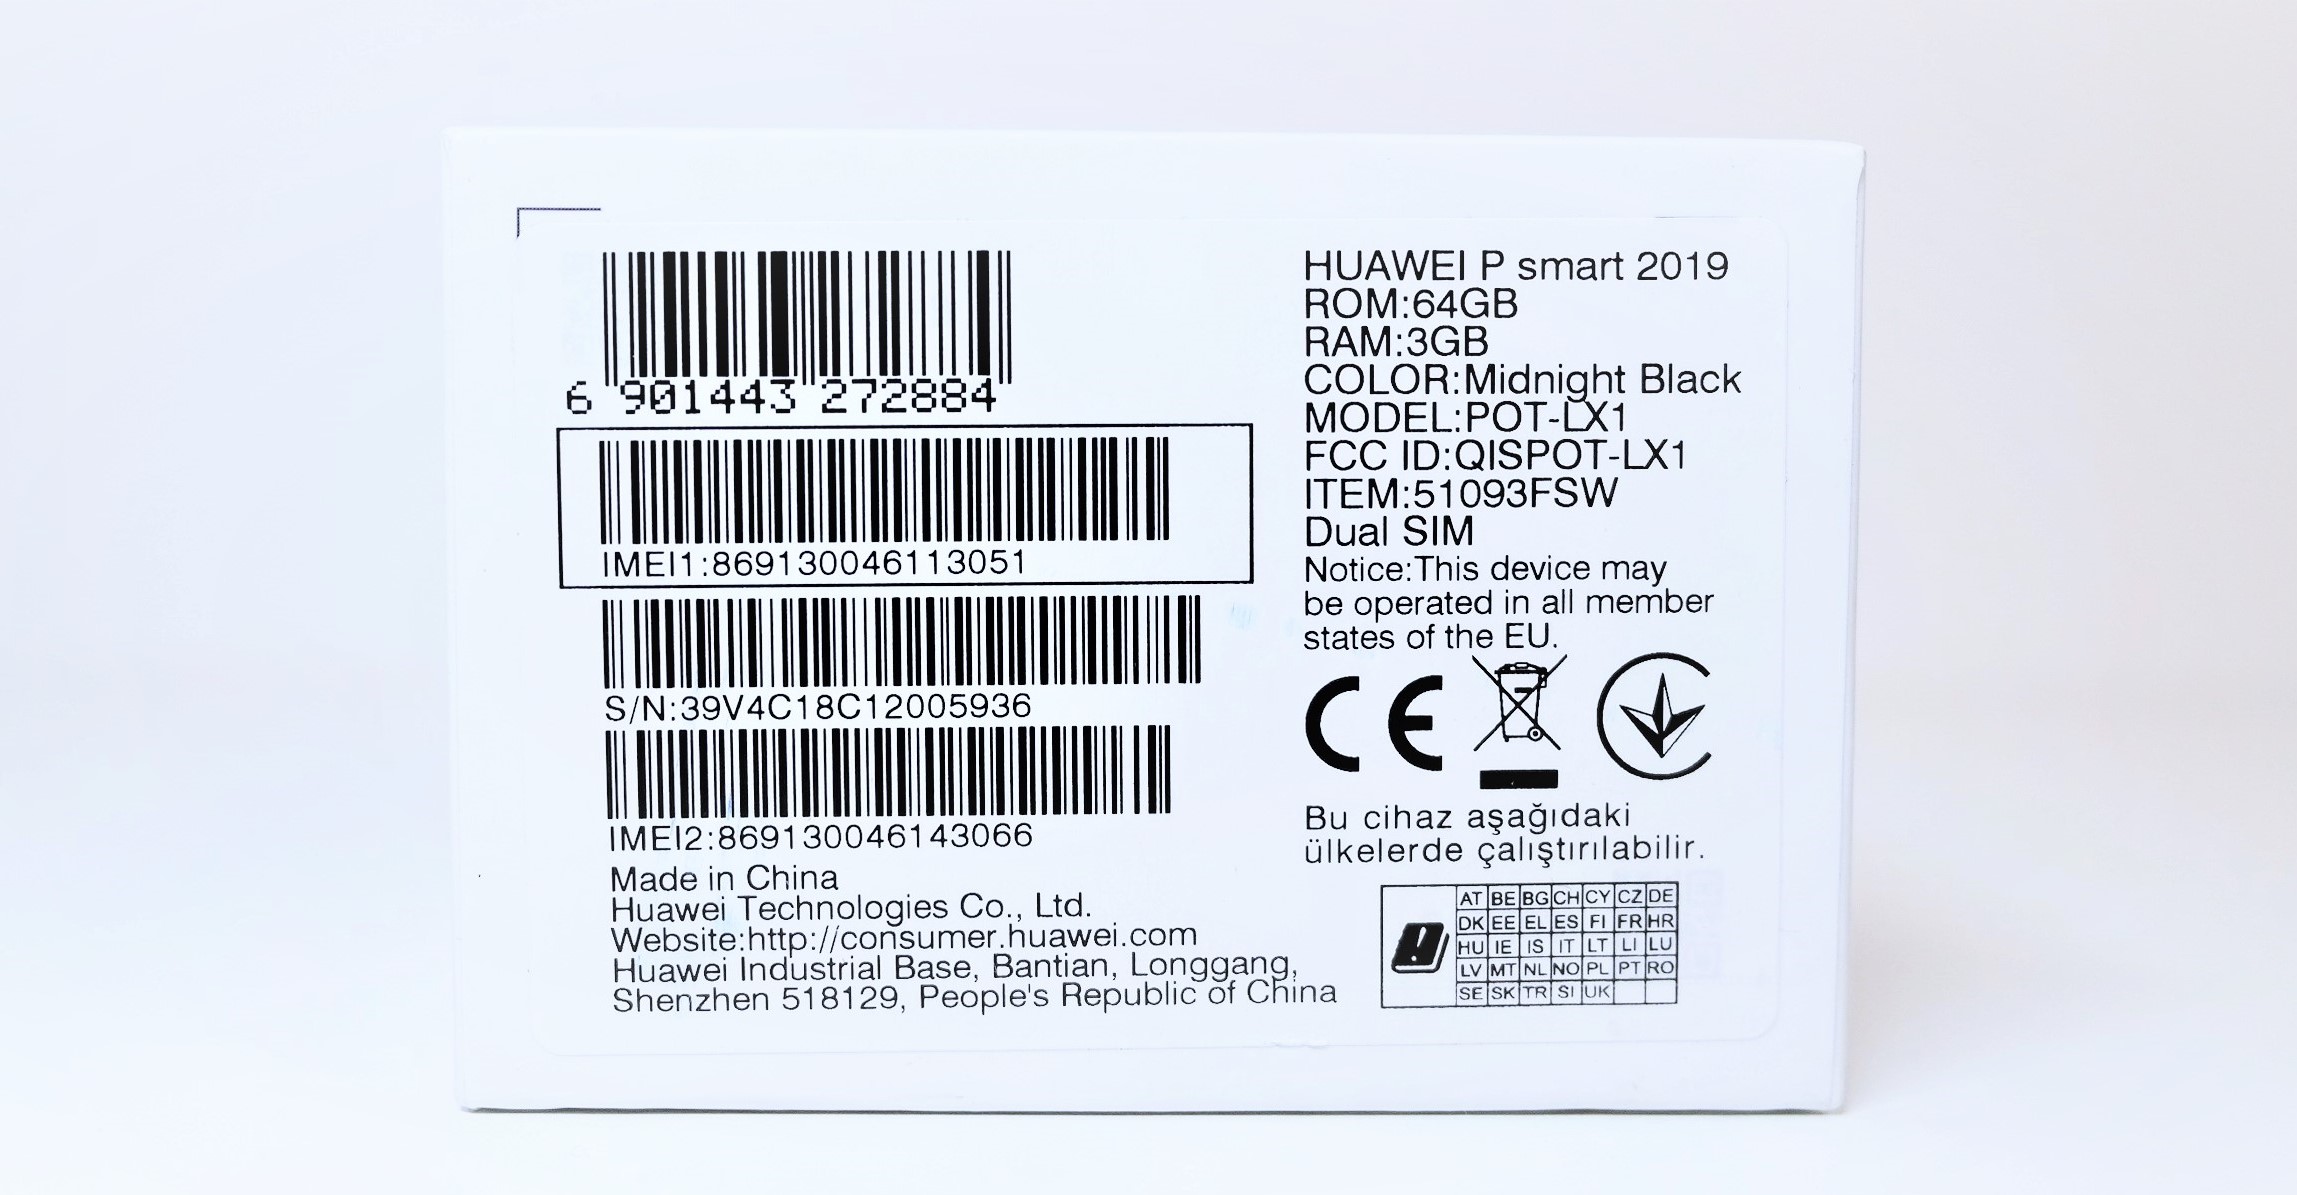 Huawei Original Box with IMEI Number